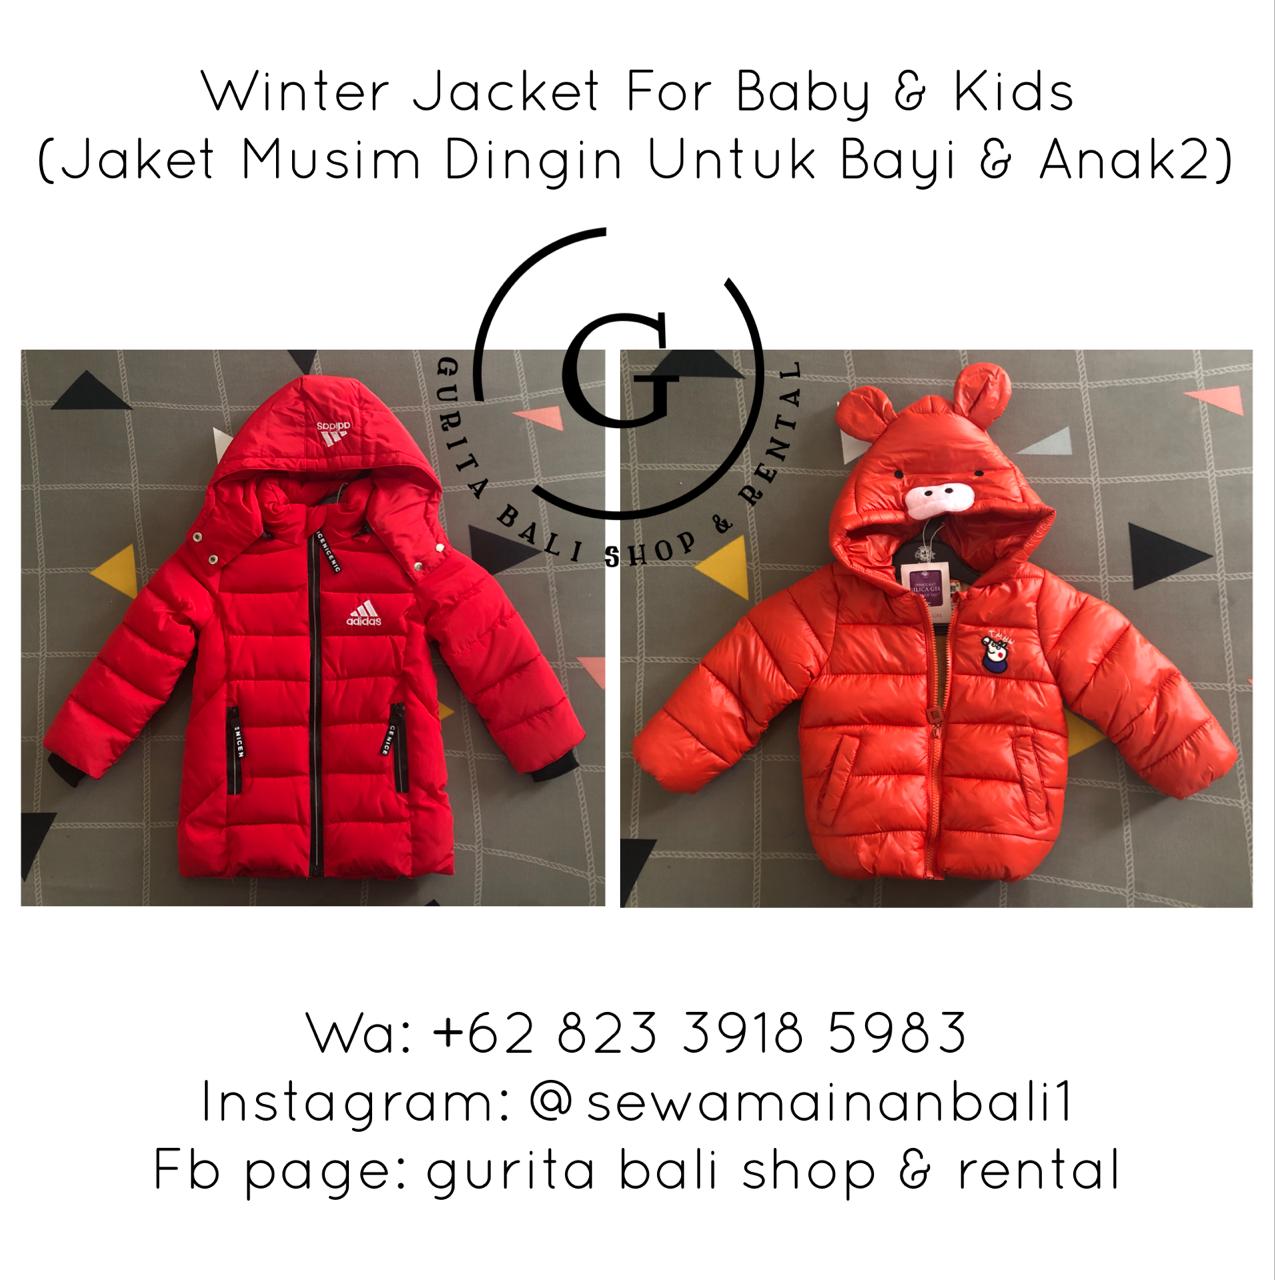 WINTER JACKET FOR BABY & KIDS SIZE M